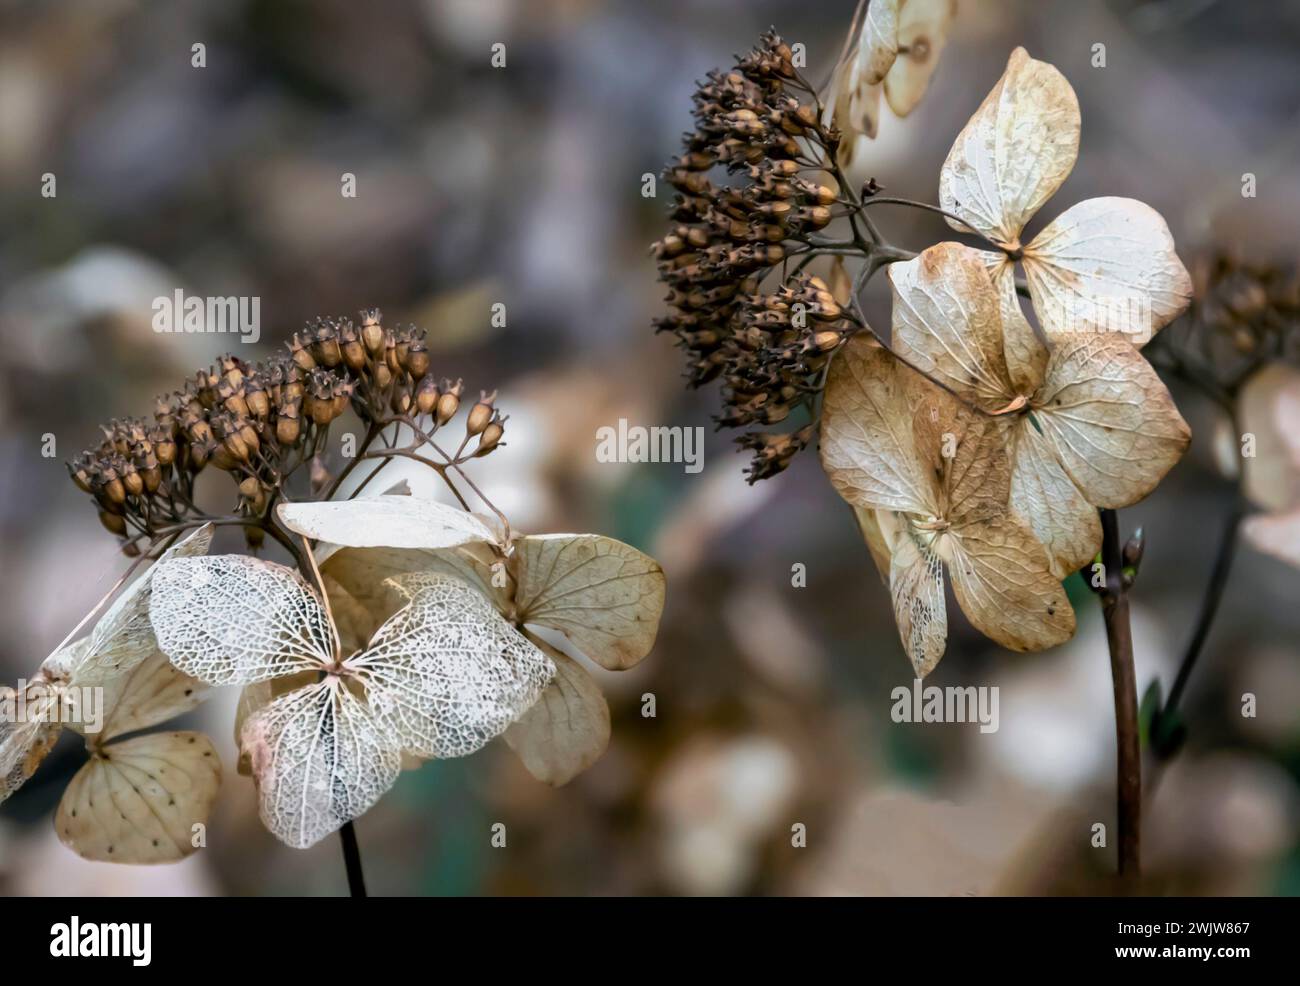 Close-up image of decaying Hydrangea seed heads in the winter months Stock Photo